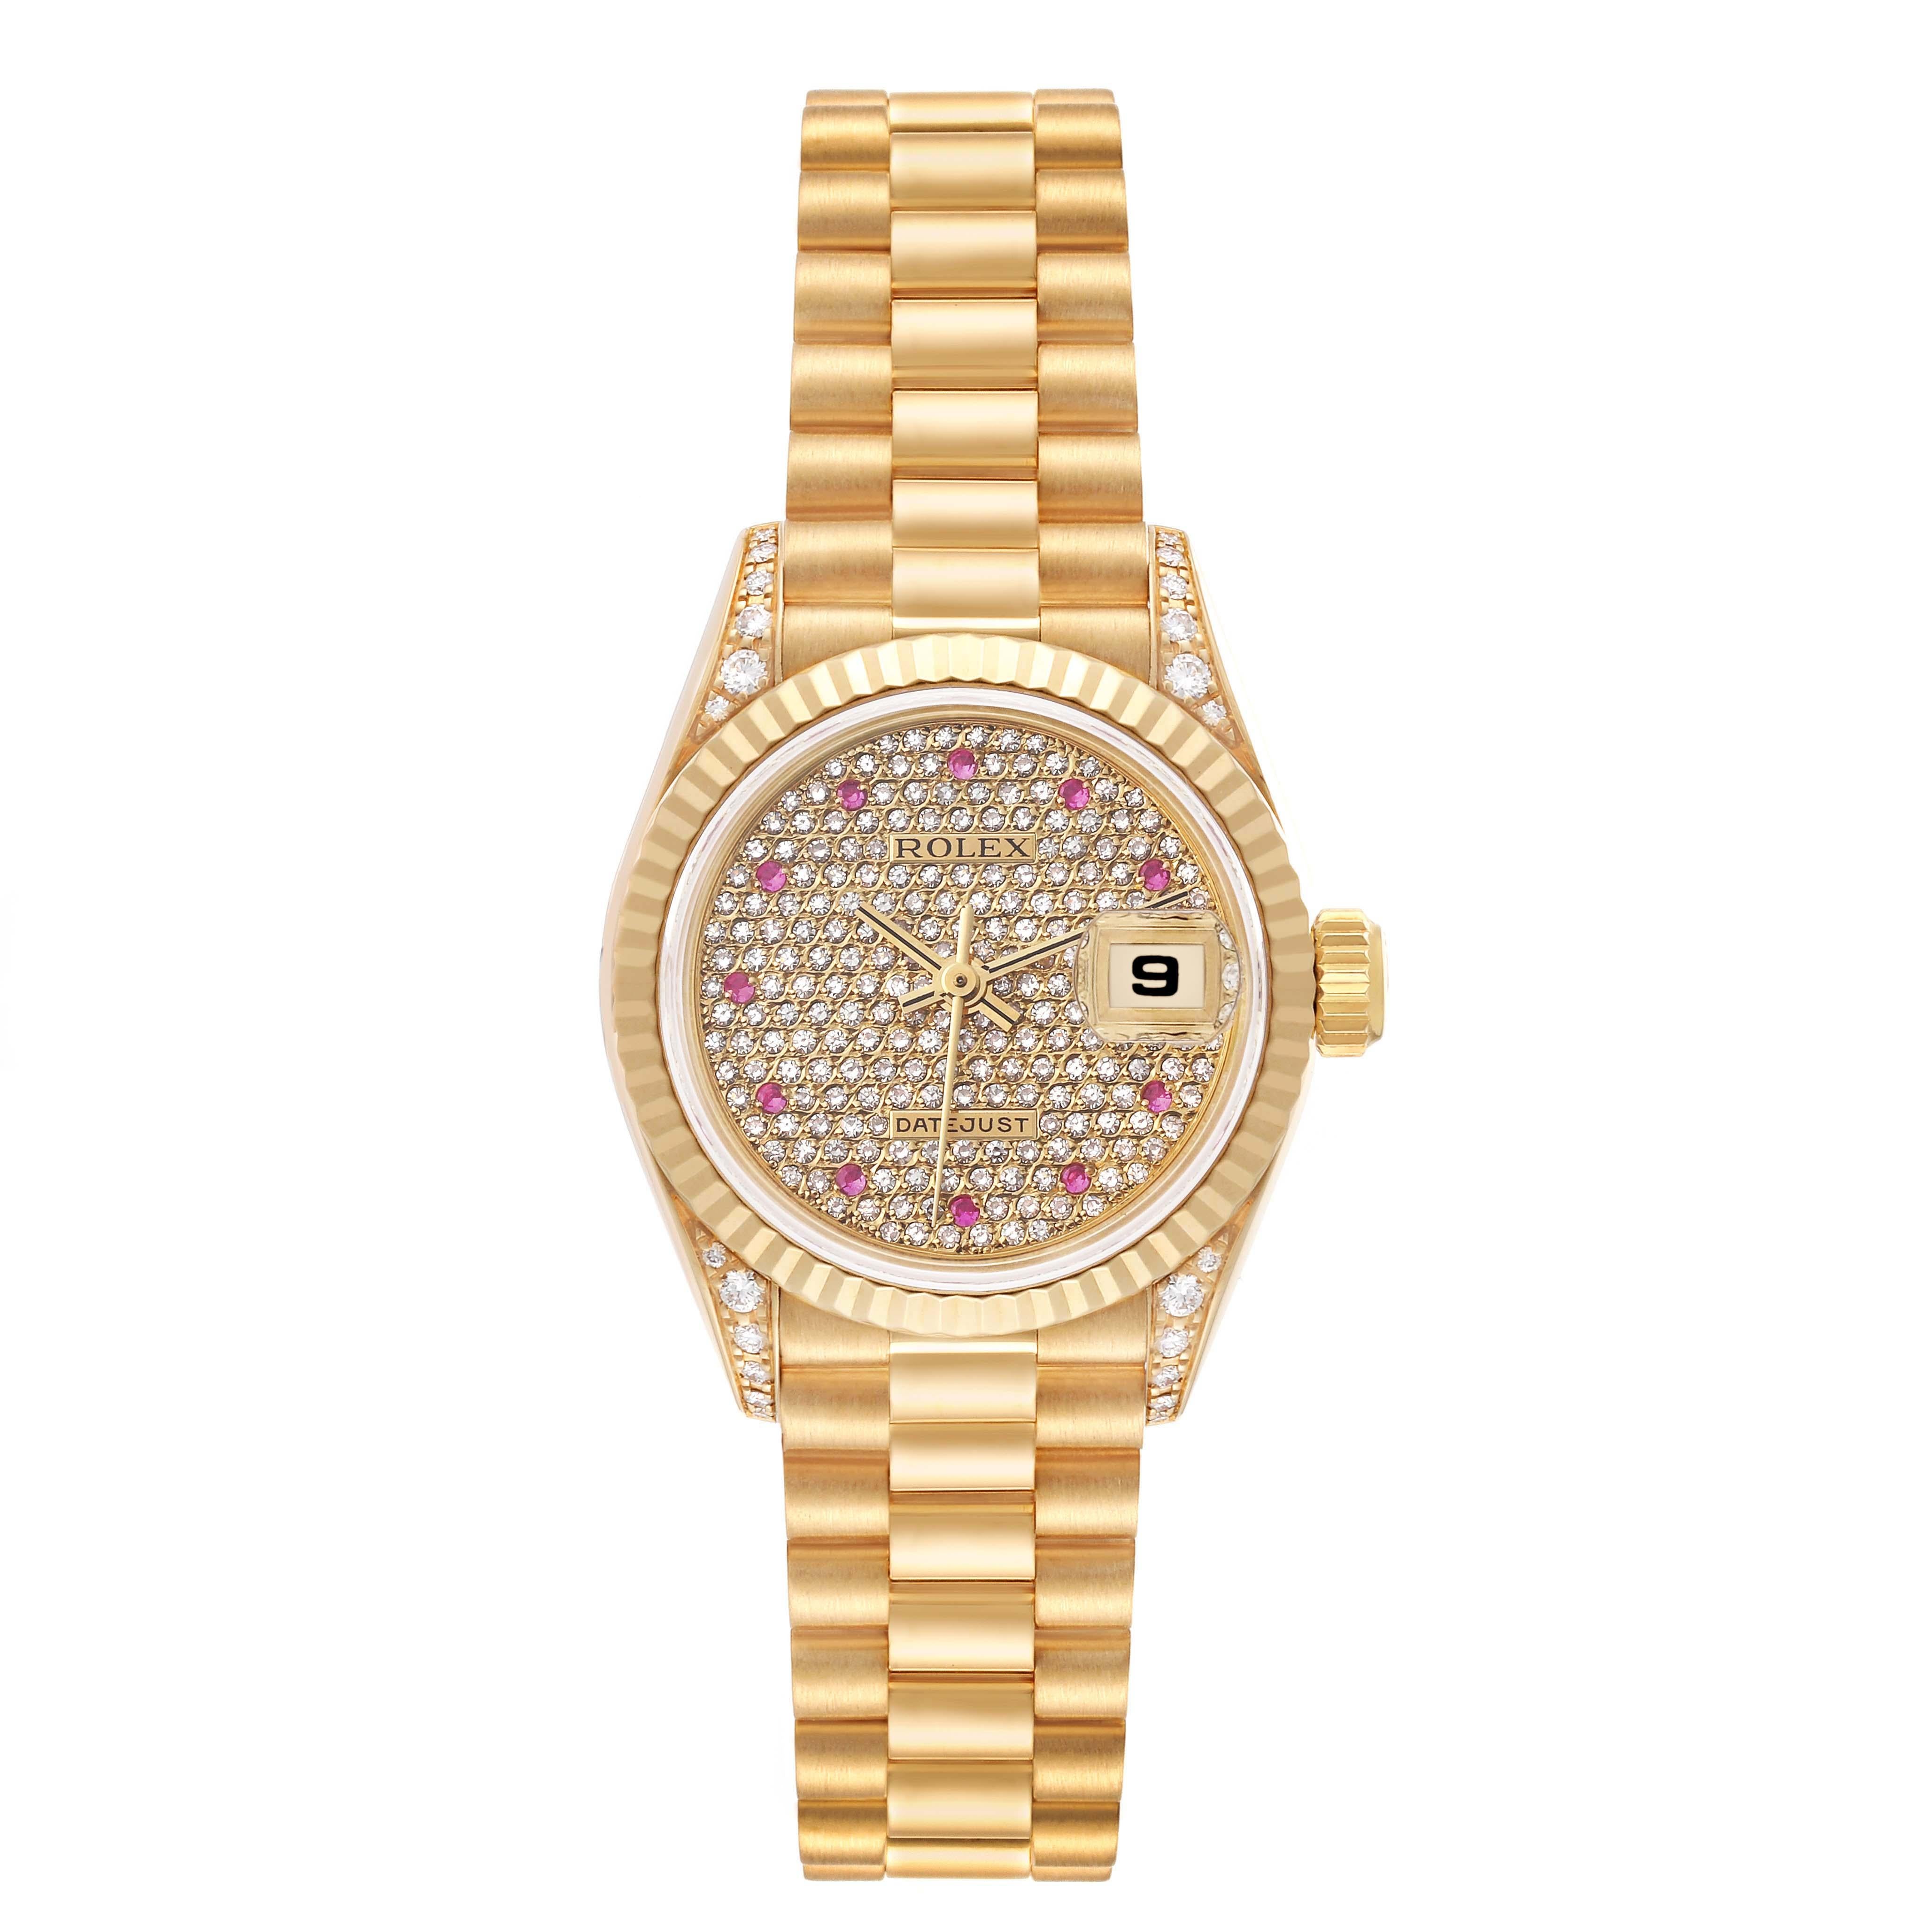 Rolex President Datejust Yellow Gold Diamond Ruby Ladies Watch 69238 Box Papers. Officially certified chronometer automatic self-winding movement. 18k yellow gold oyster case 26.0 mm in diameter. Rolex logo on the crown. Original Rolex factory